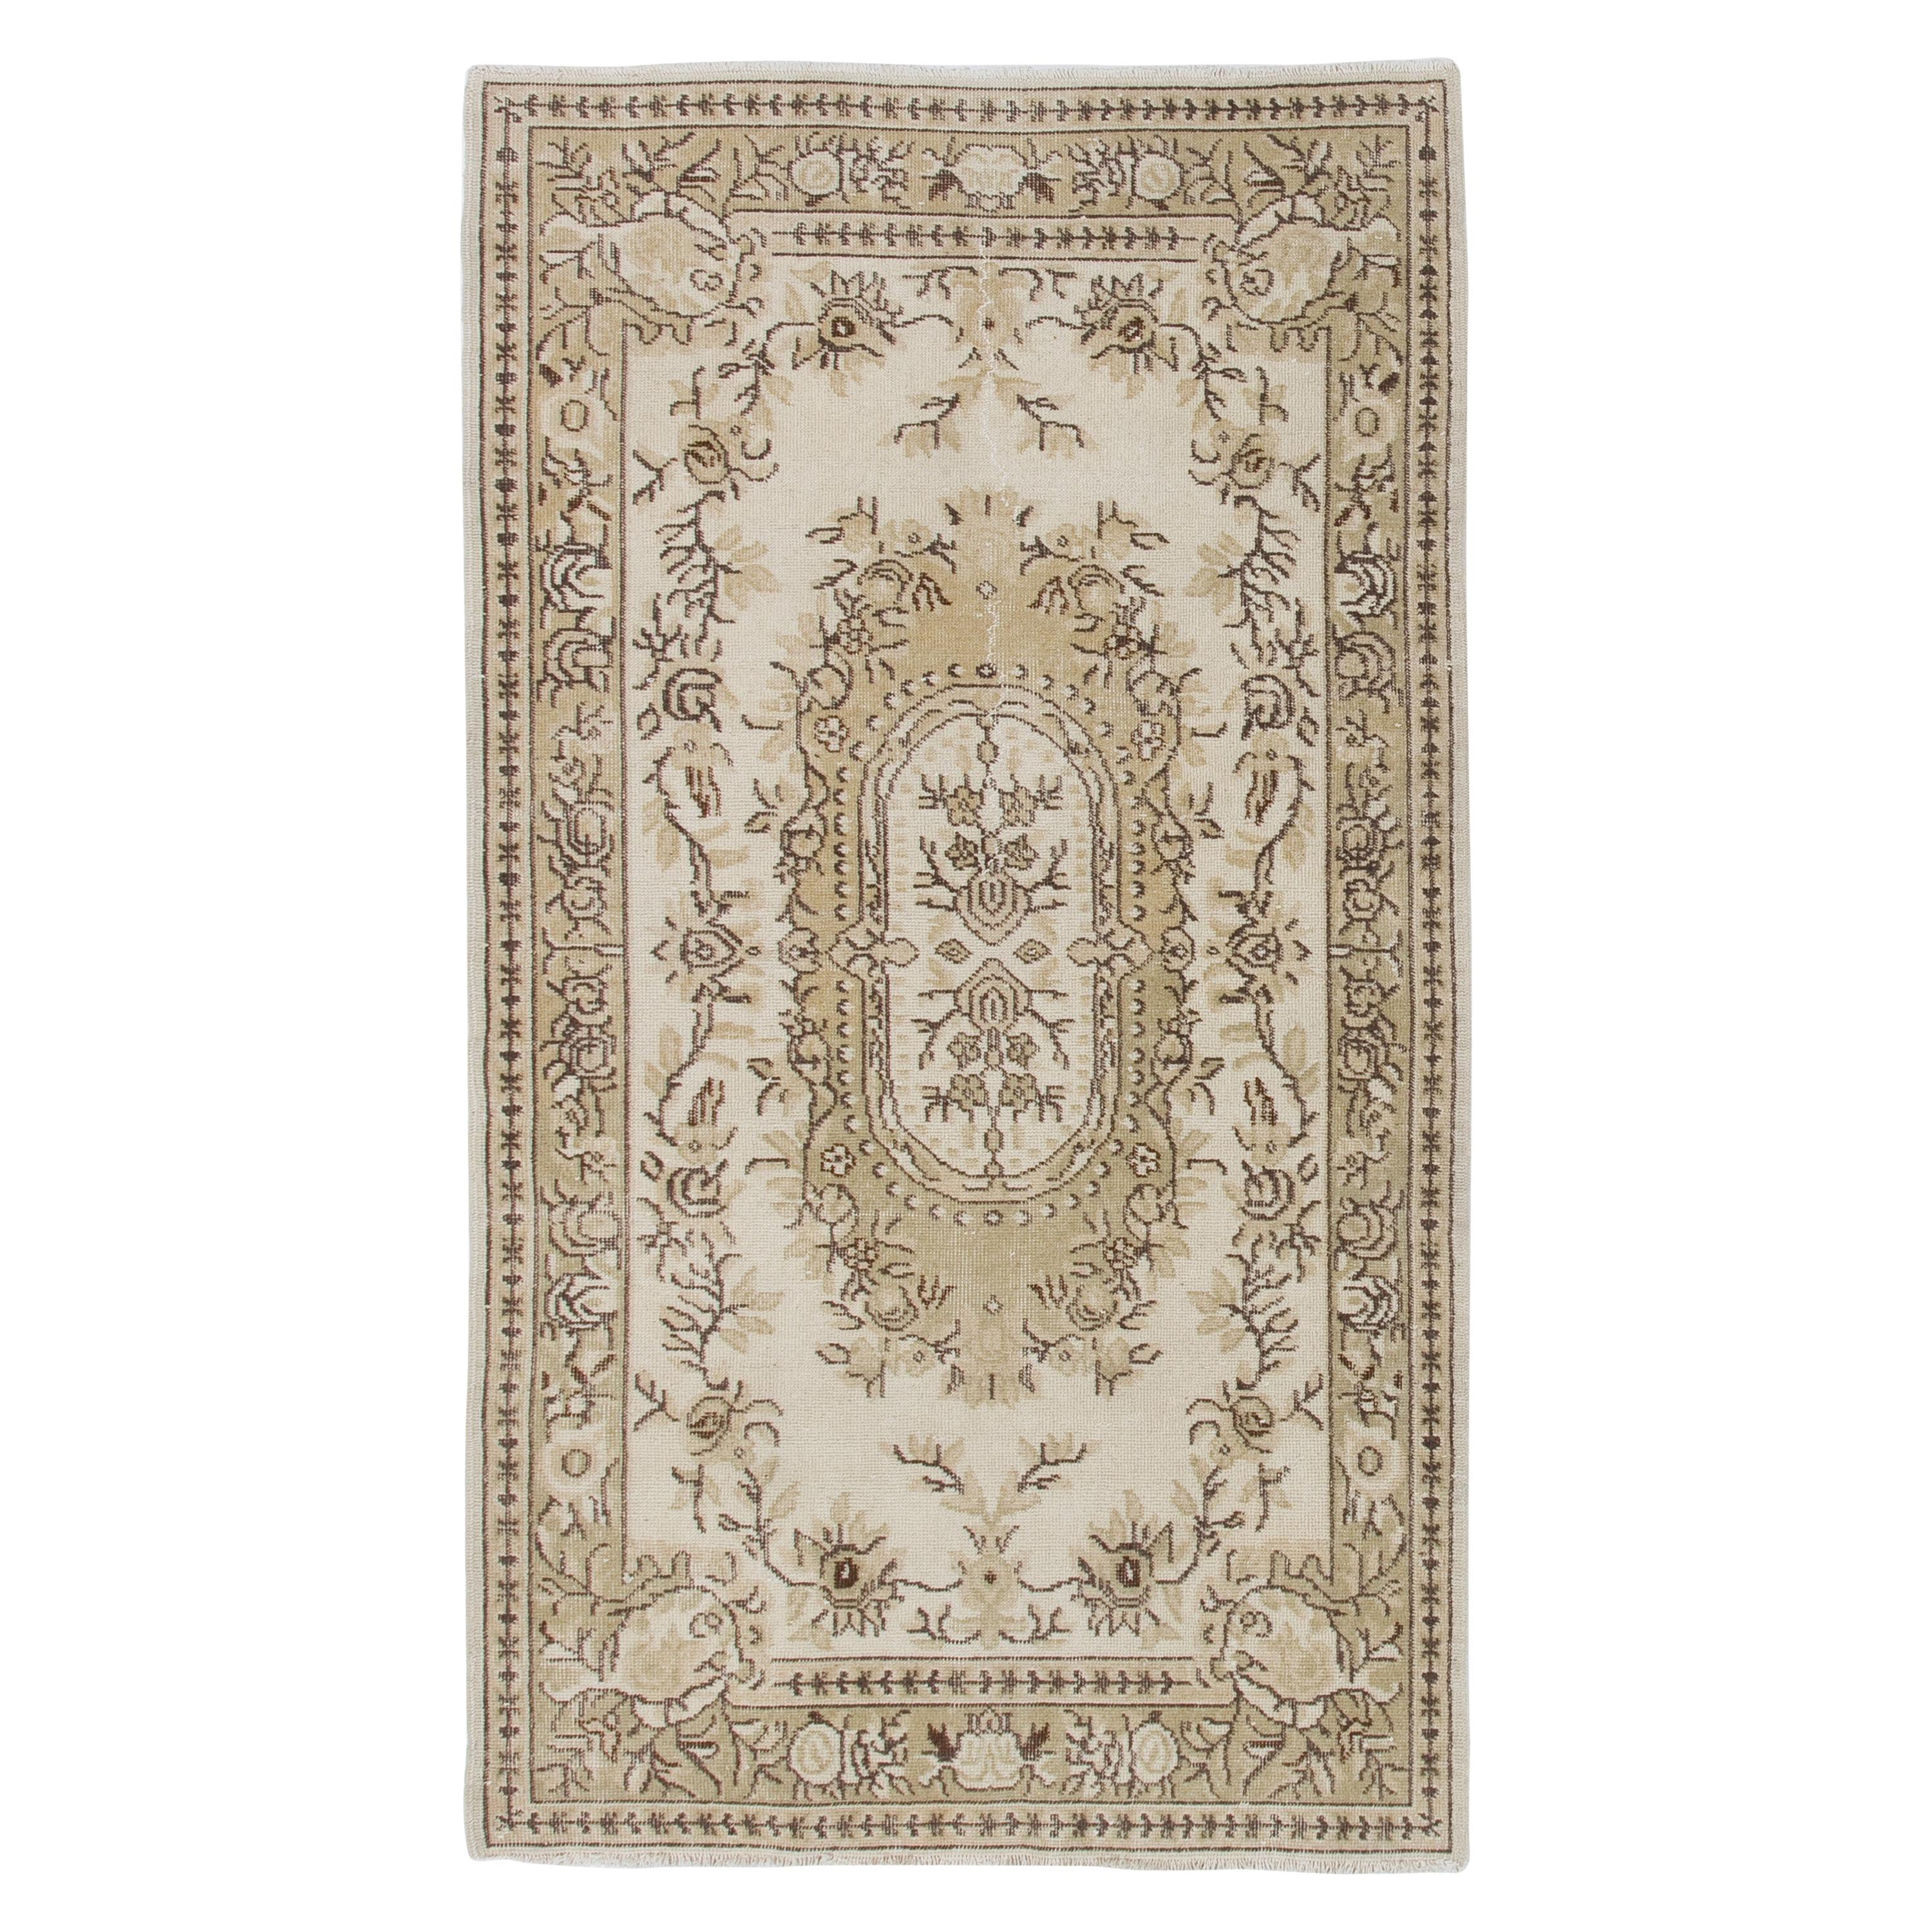 4x7 ft Vintage French Aubusson Inspired Wool Hand-knotted Rug in Soft Colors